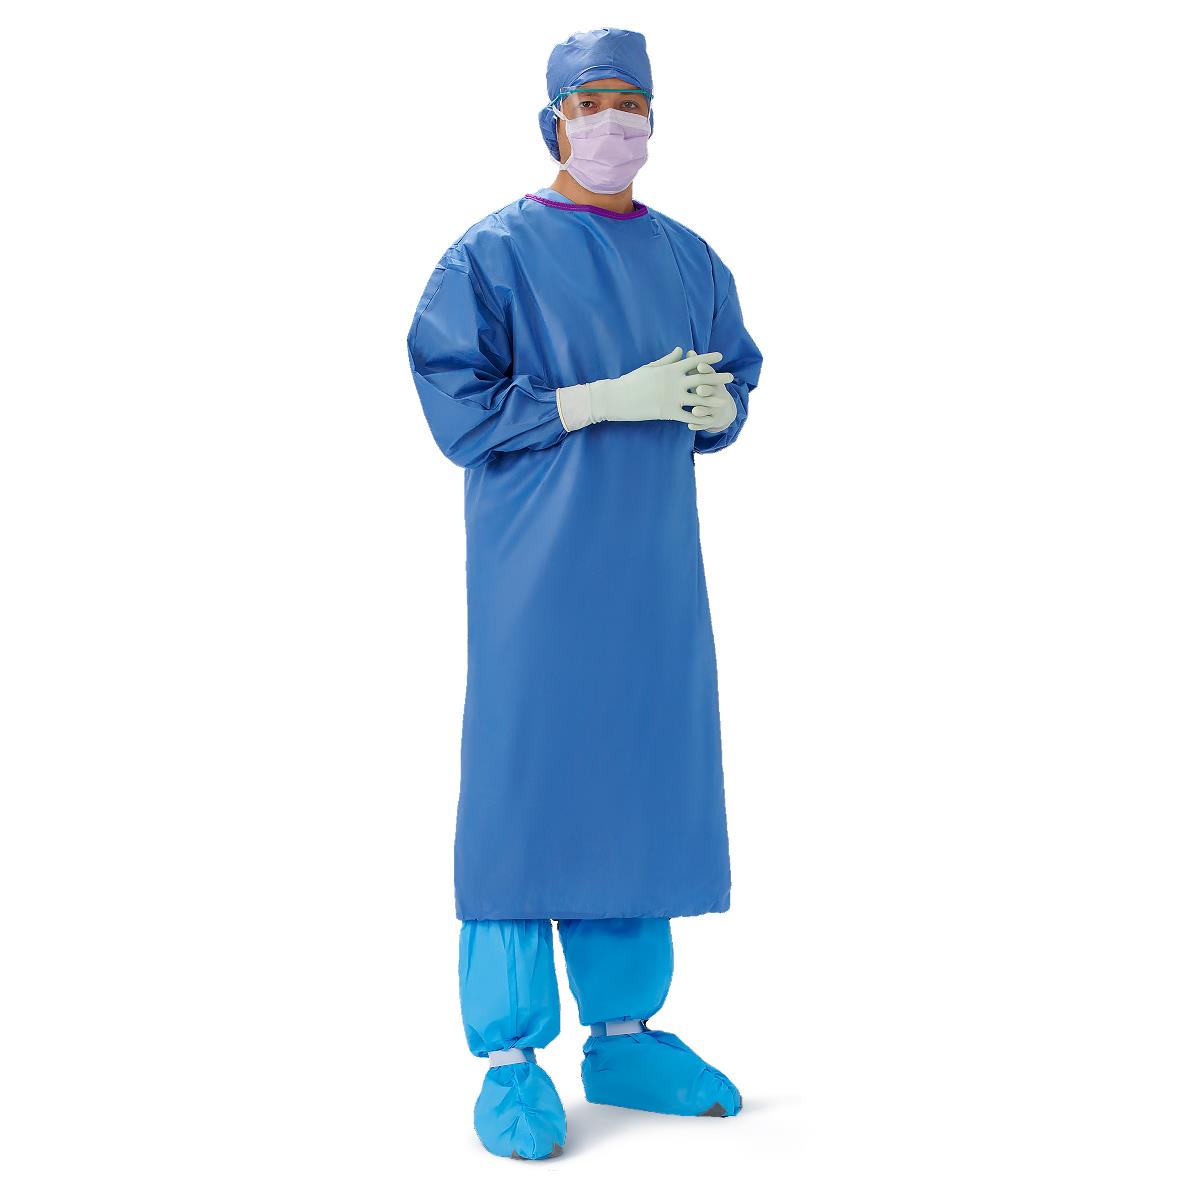 Blue Full Sleeve Disposable Surgeon Gown, for Surgical, Hospital, Clinic,  Size : M, XL, XXL at Rs 150 / Piece in Faridabad